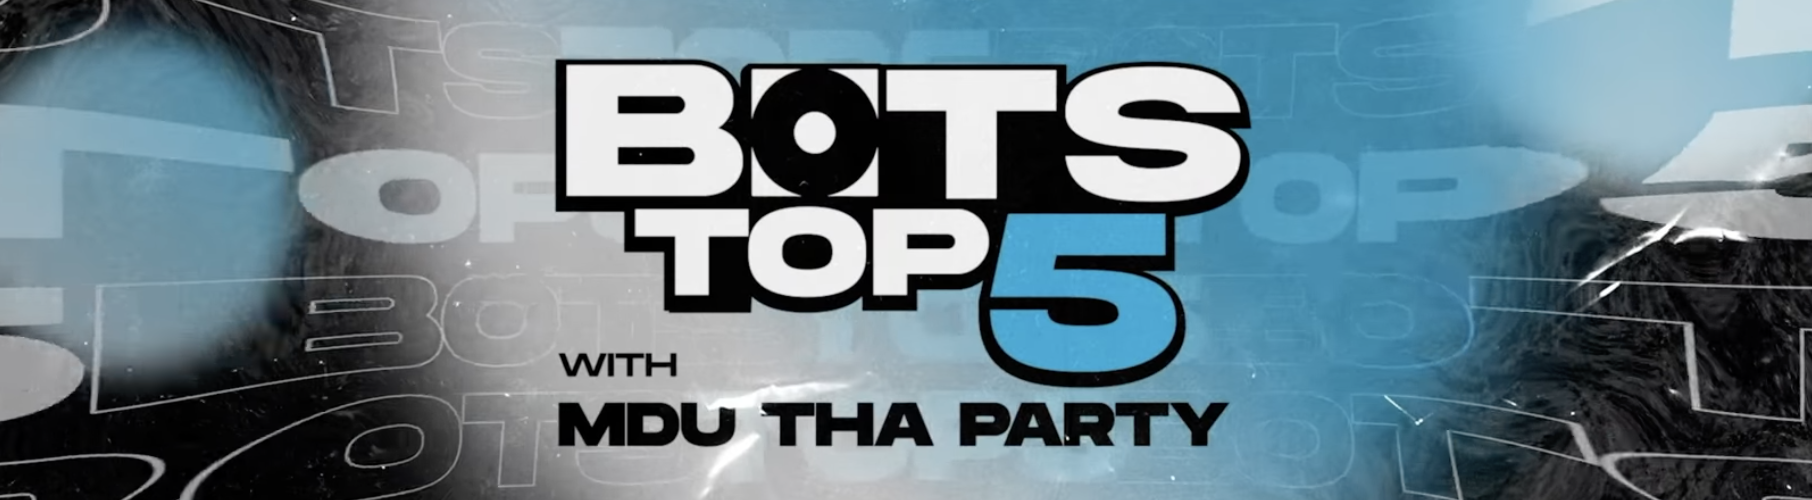 Bots Top 5 coming to Channel O with Mdu Tha Party as Host